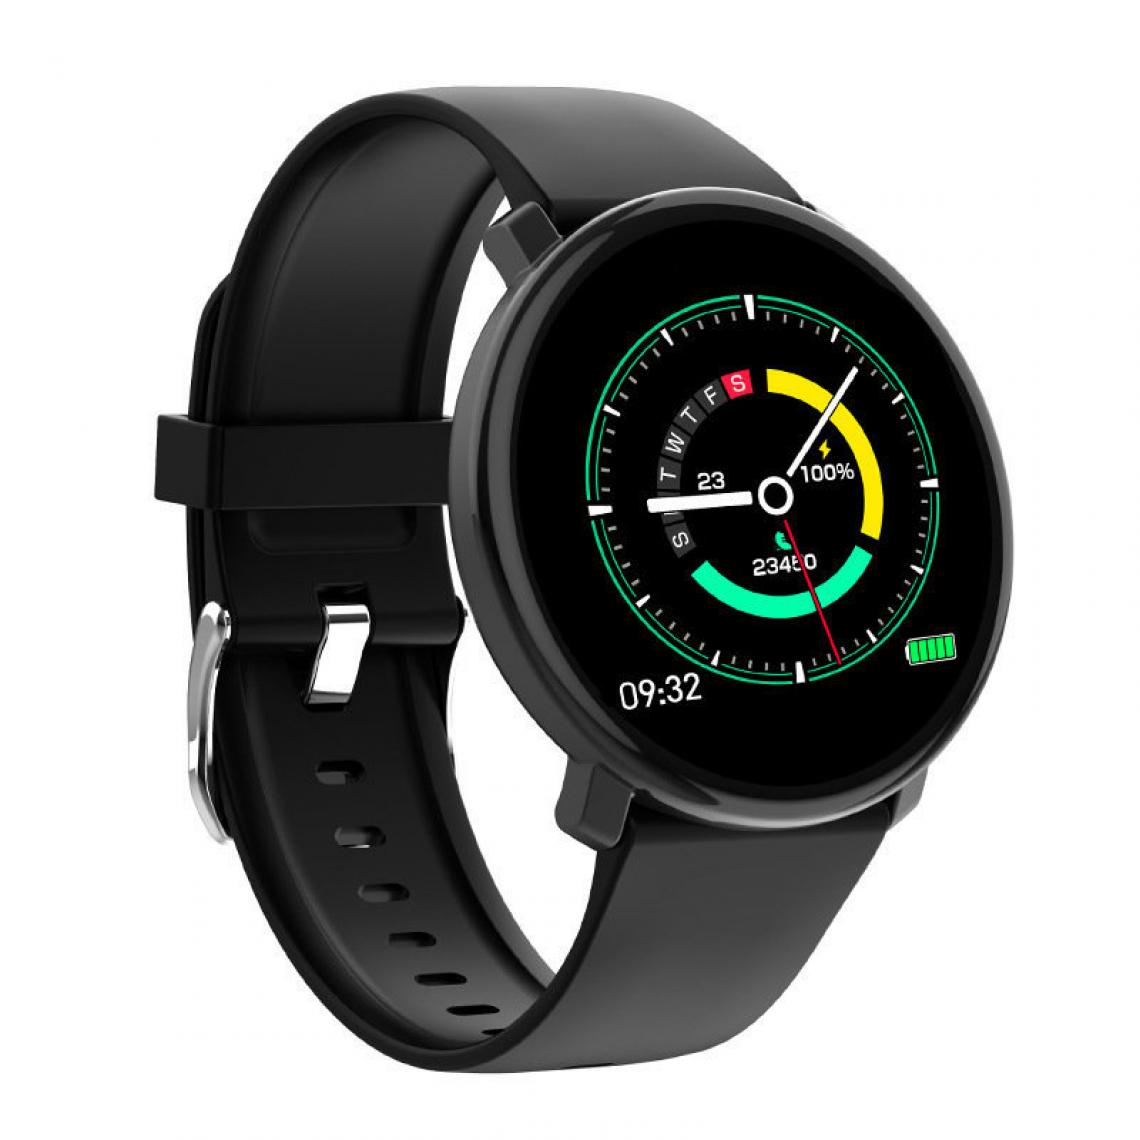 Chronotech Montres - Chronus Connected Watch - Large 3.3 cm screen - Measurement of heart rate, blood pressure, oxygen level in the blood(black) - Montre connectée